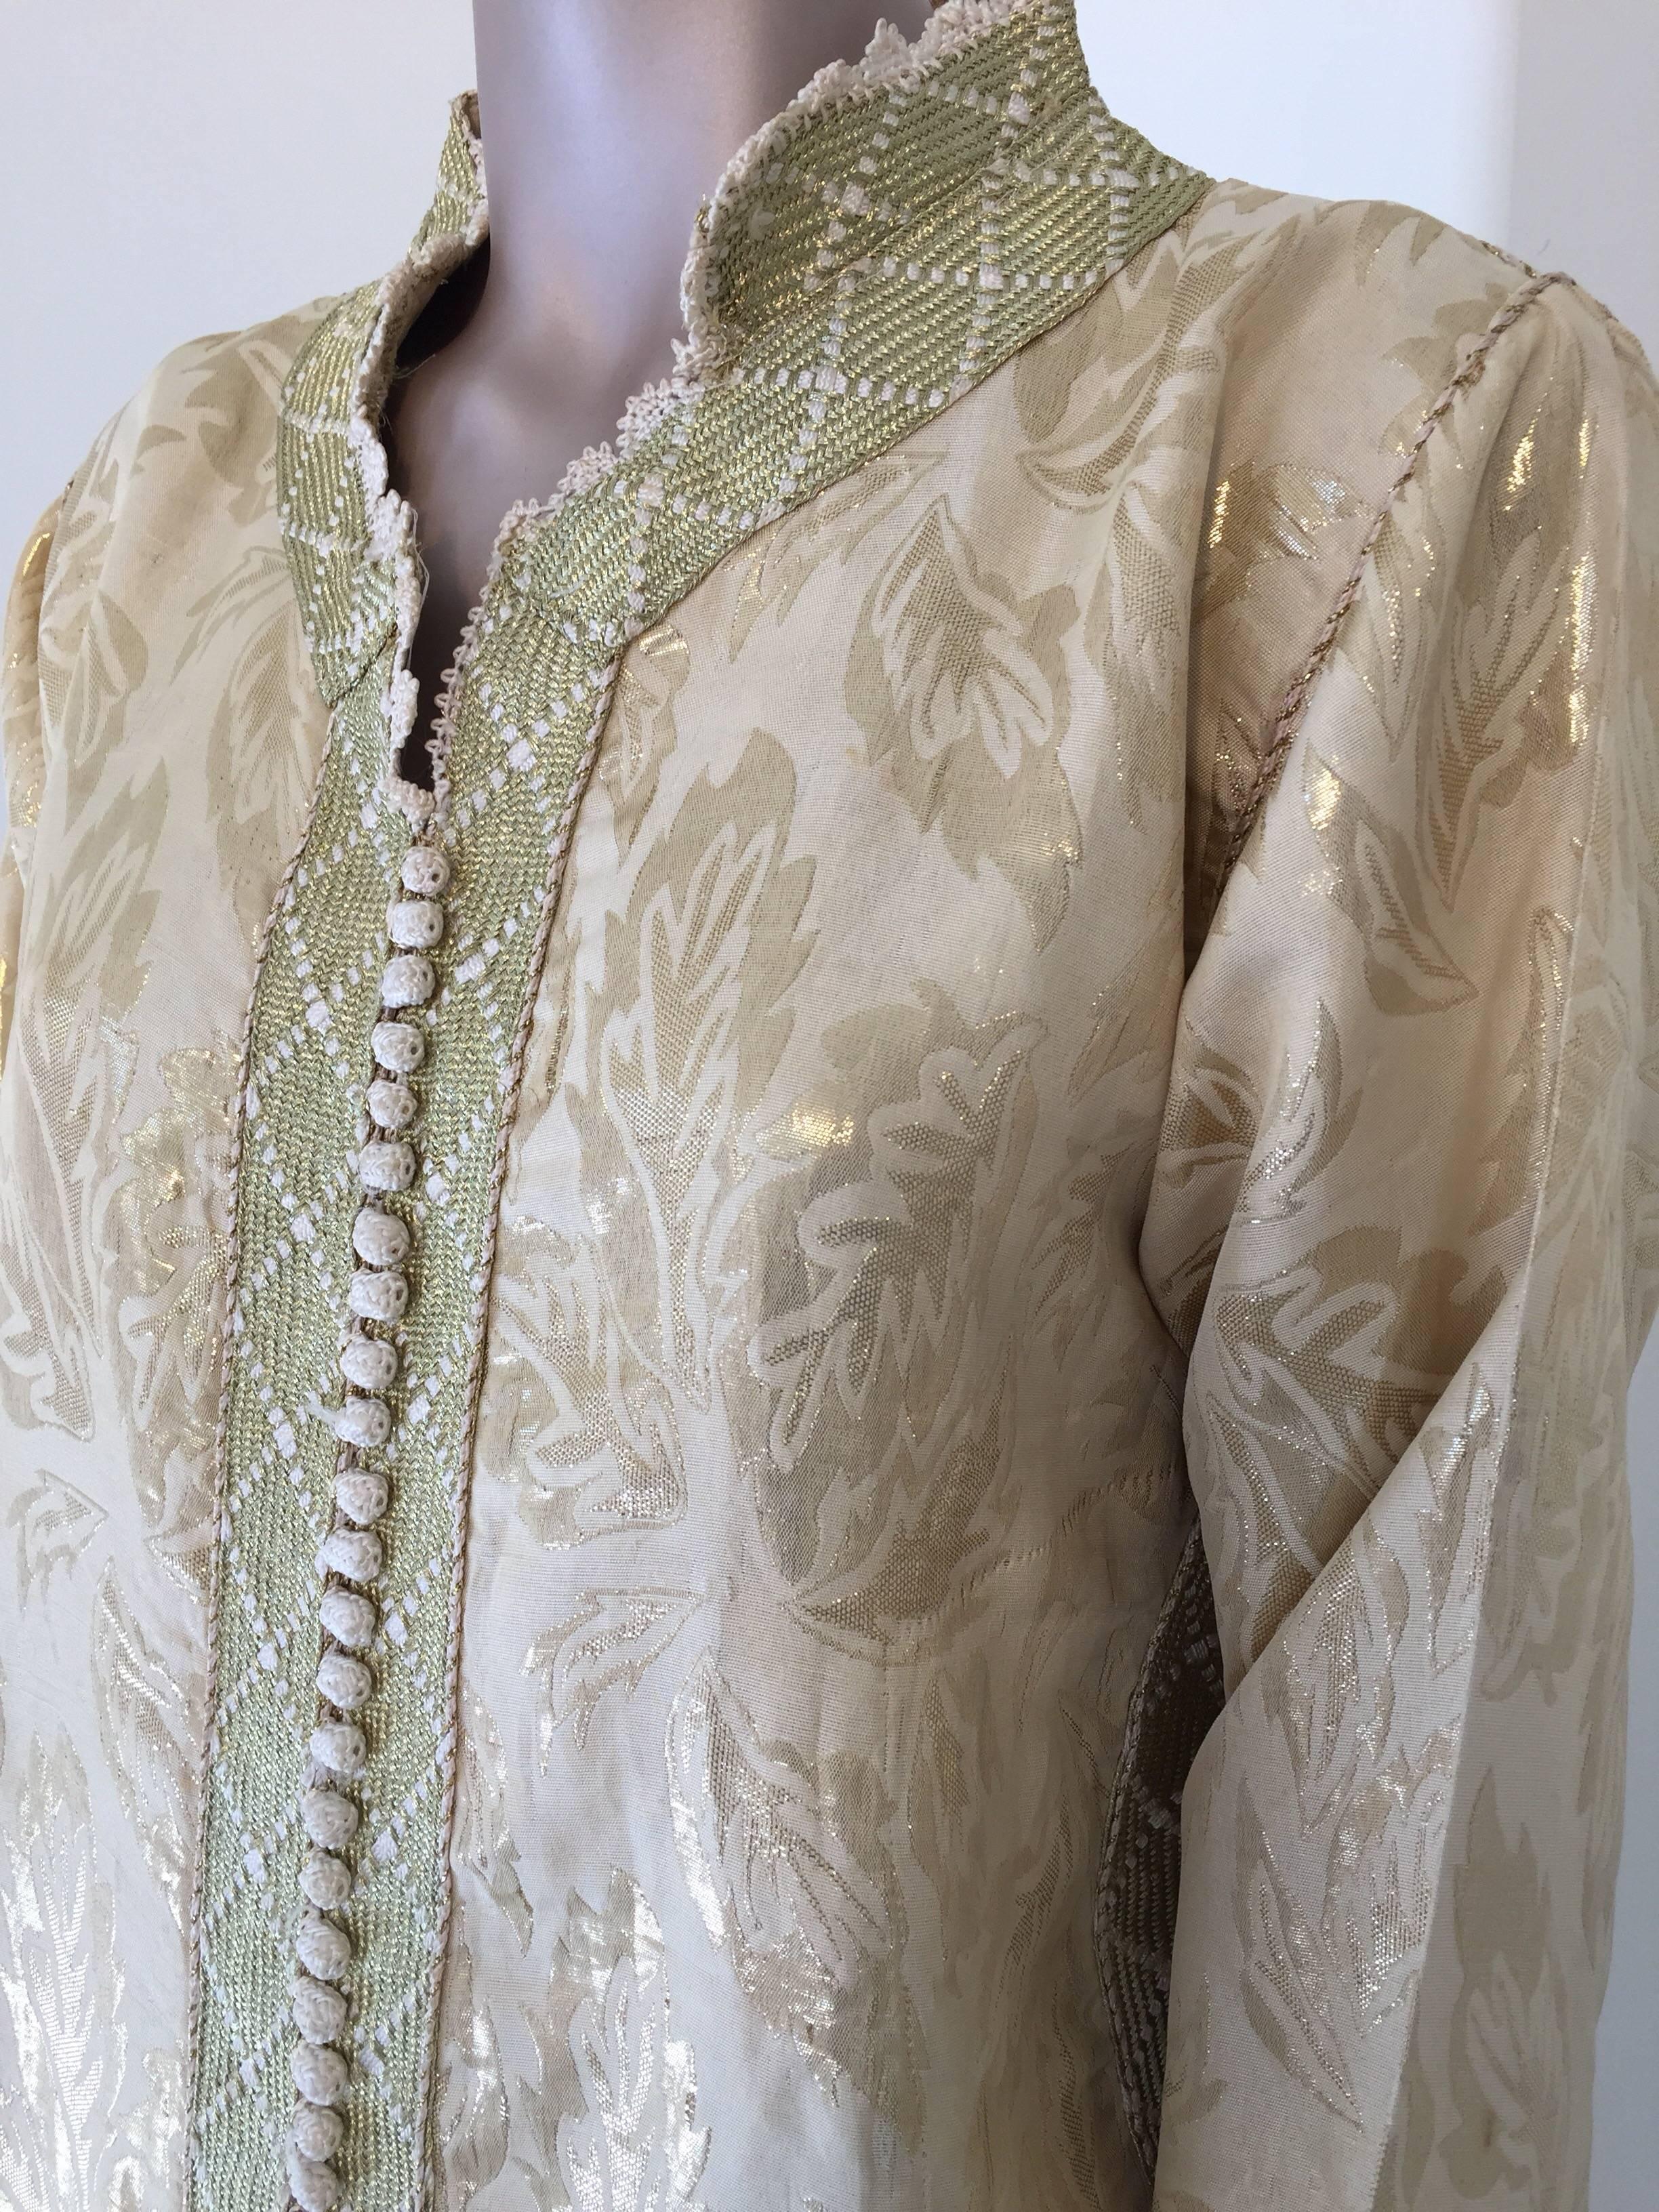 Moroccan Metallic Gold Brocade Kaftan, Maxi Dress Kaftan from Morocco, Africa In Good Condition For Sale In North Hollywood, CA